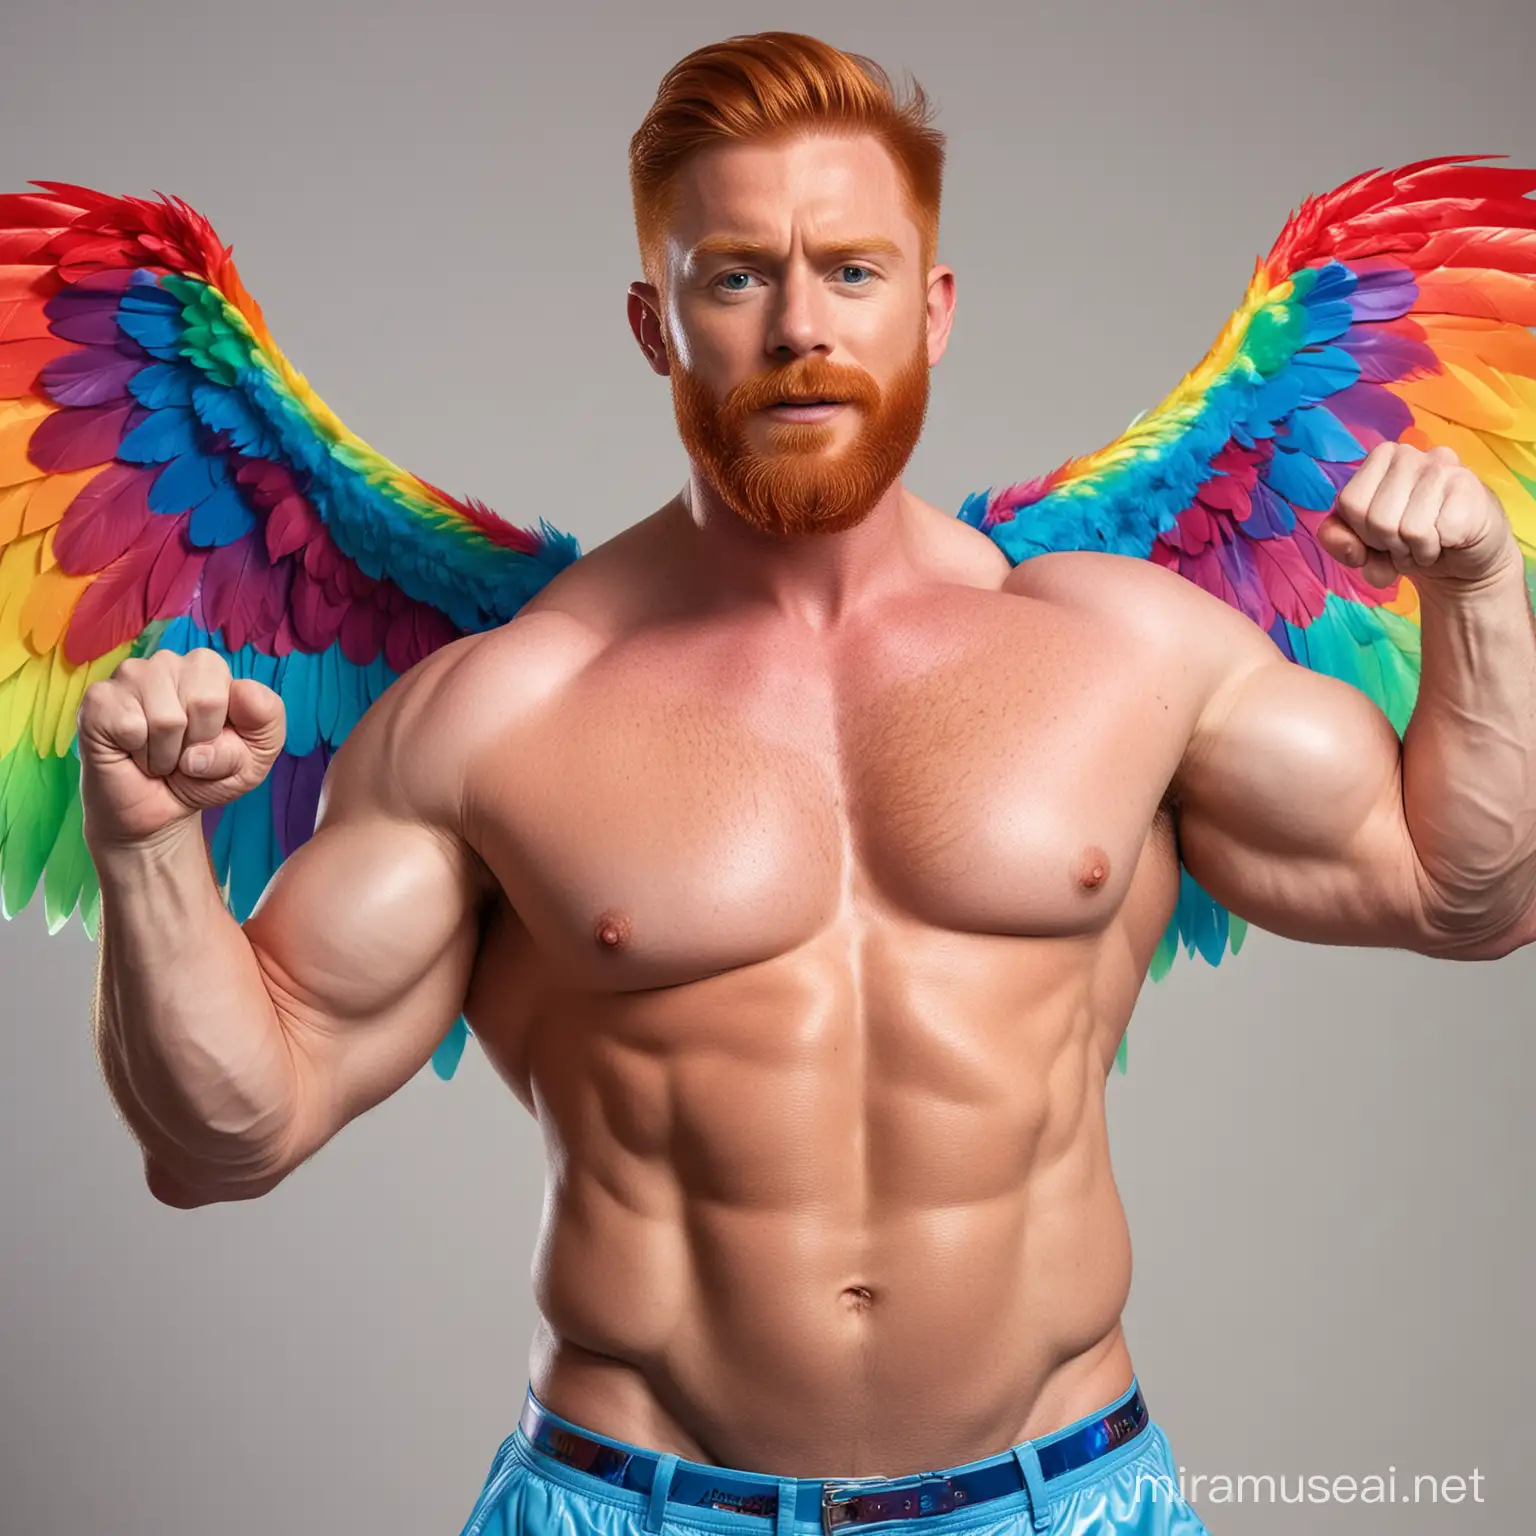 Topless 30s Thick Beefy Redhead IFBB Bodybuilder Beard Daddy wearing Multi-Highlighter Bright Rainbow Coloured See Through Jacket with Eagle wings and Flexing Big Strong Arm with doraemon